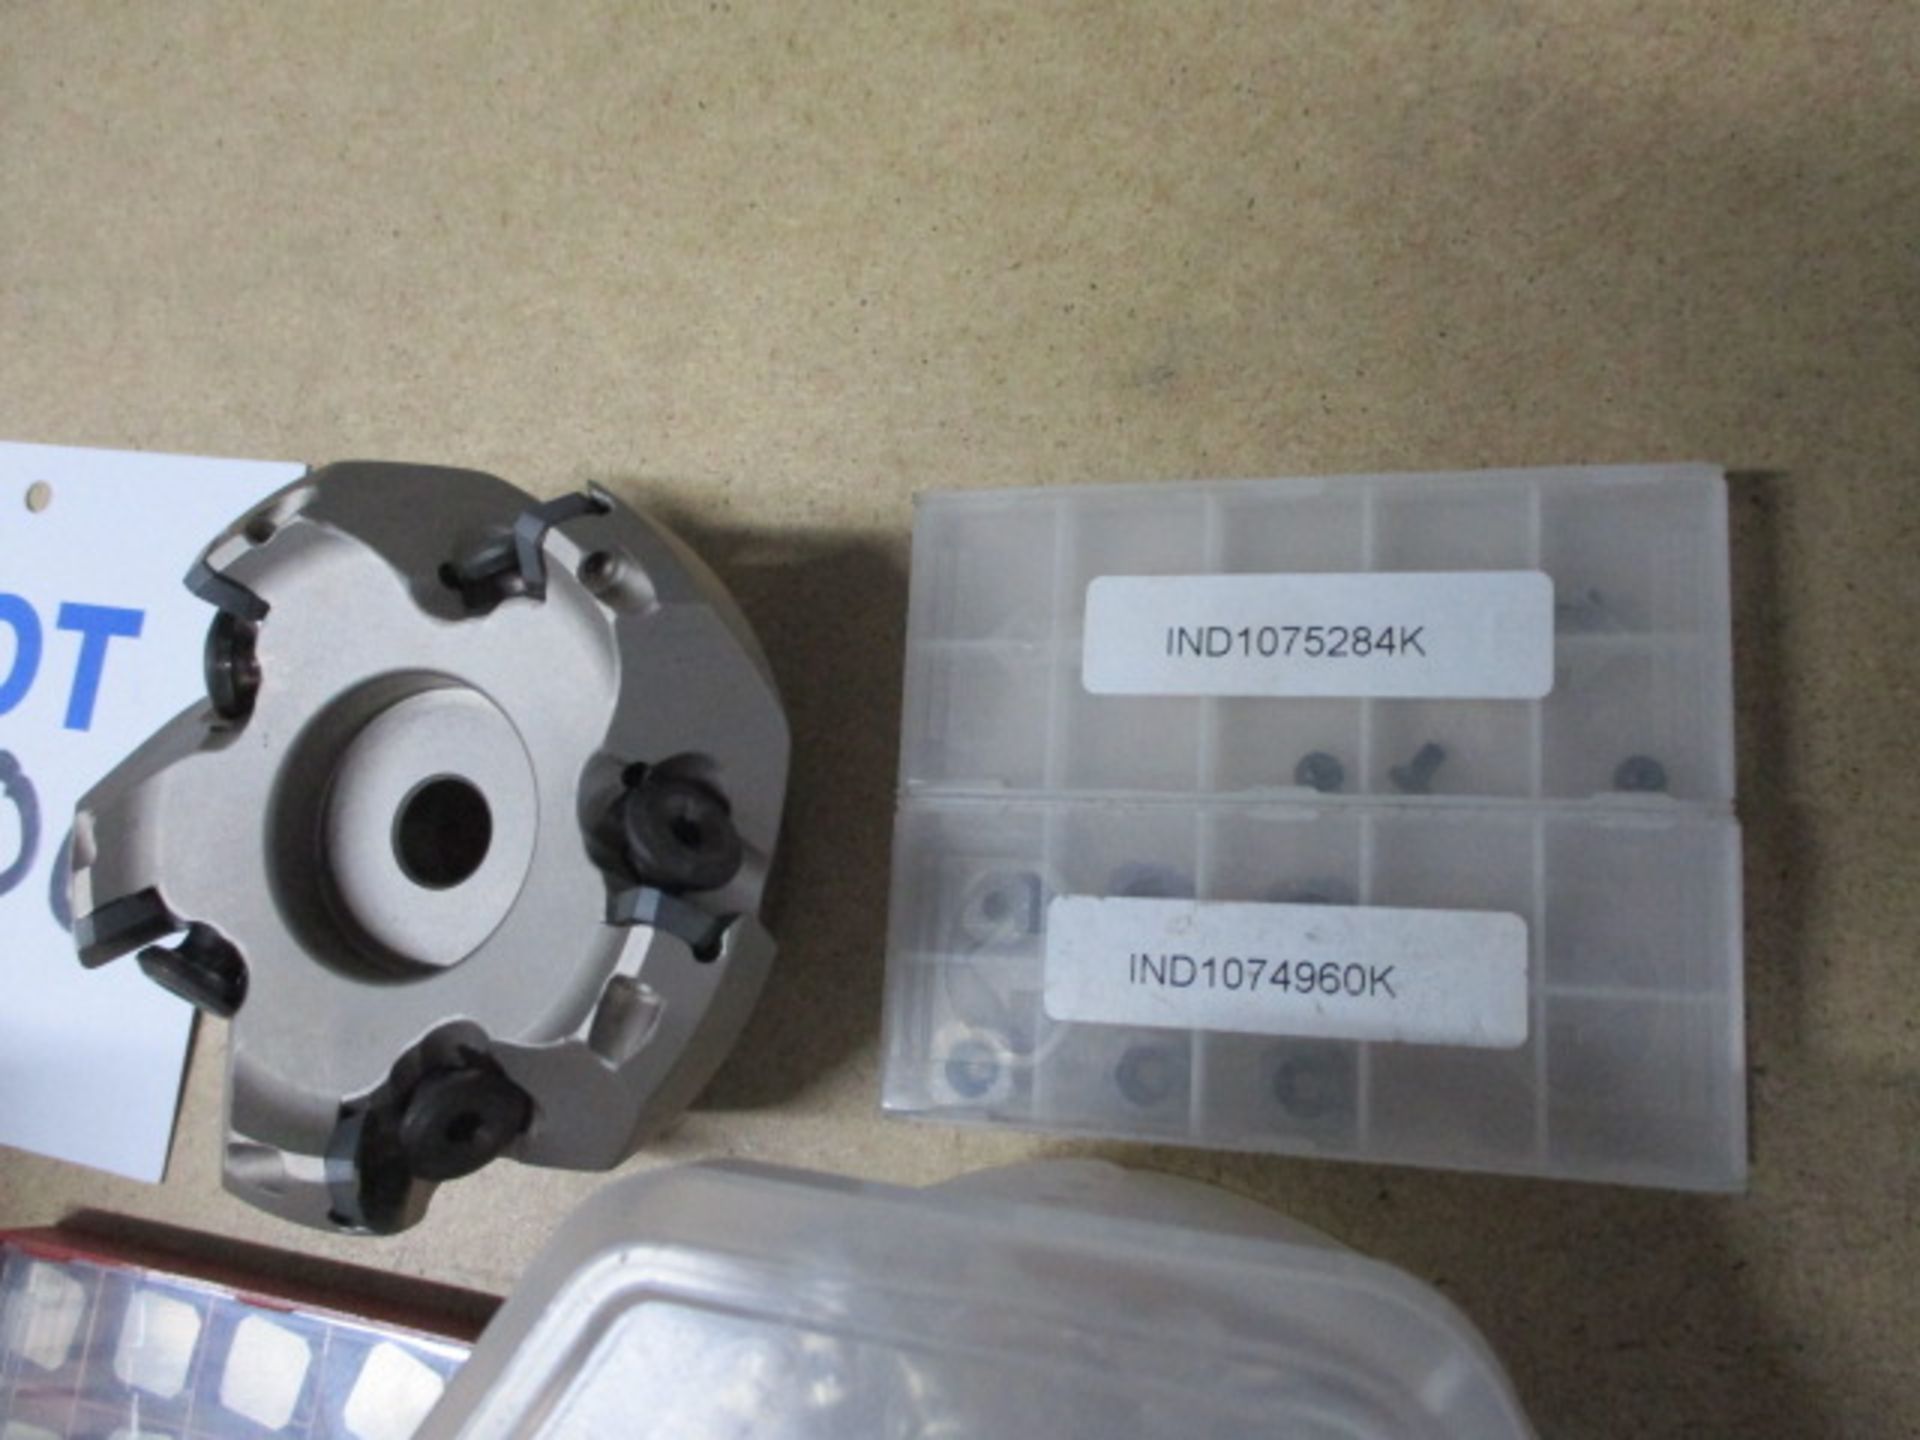 Indexable milling cutter with inserts - Image 4 of 4